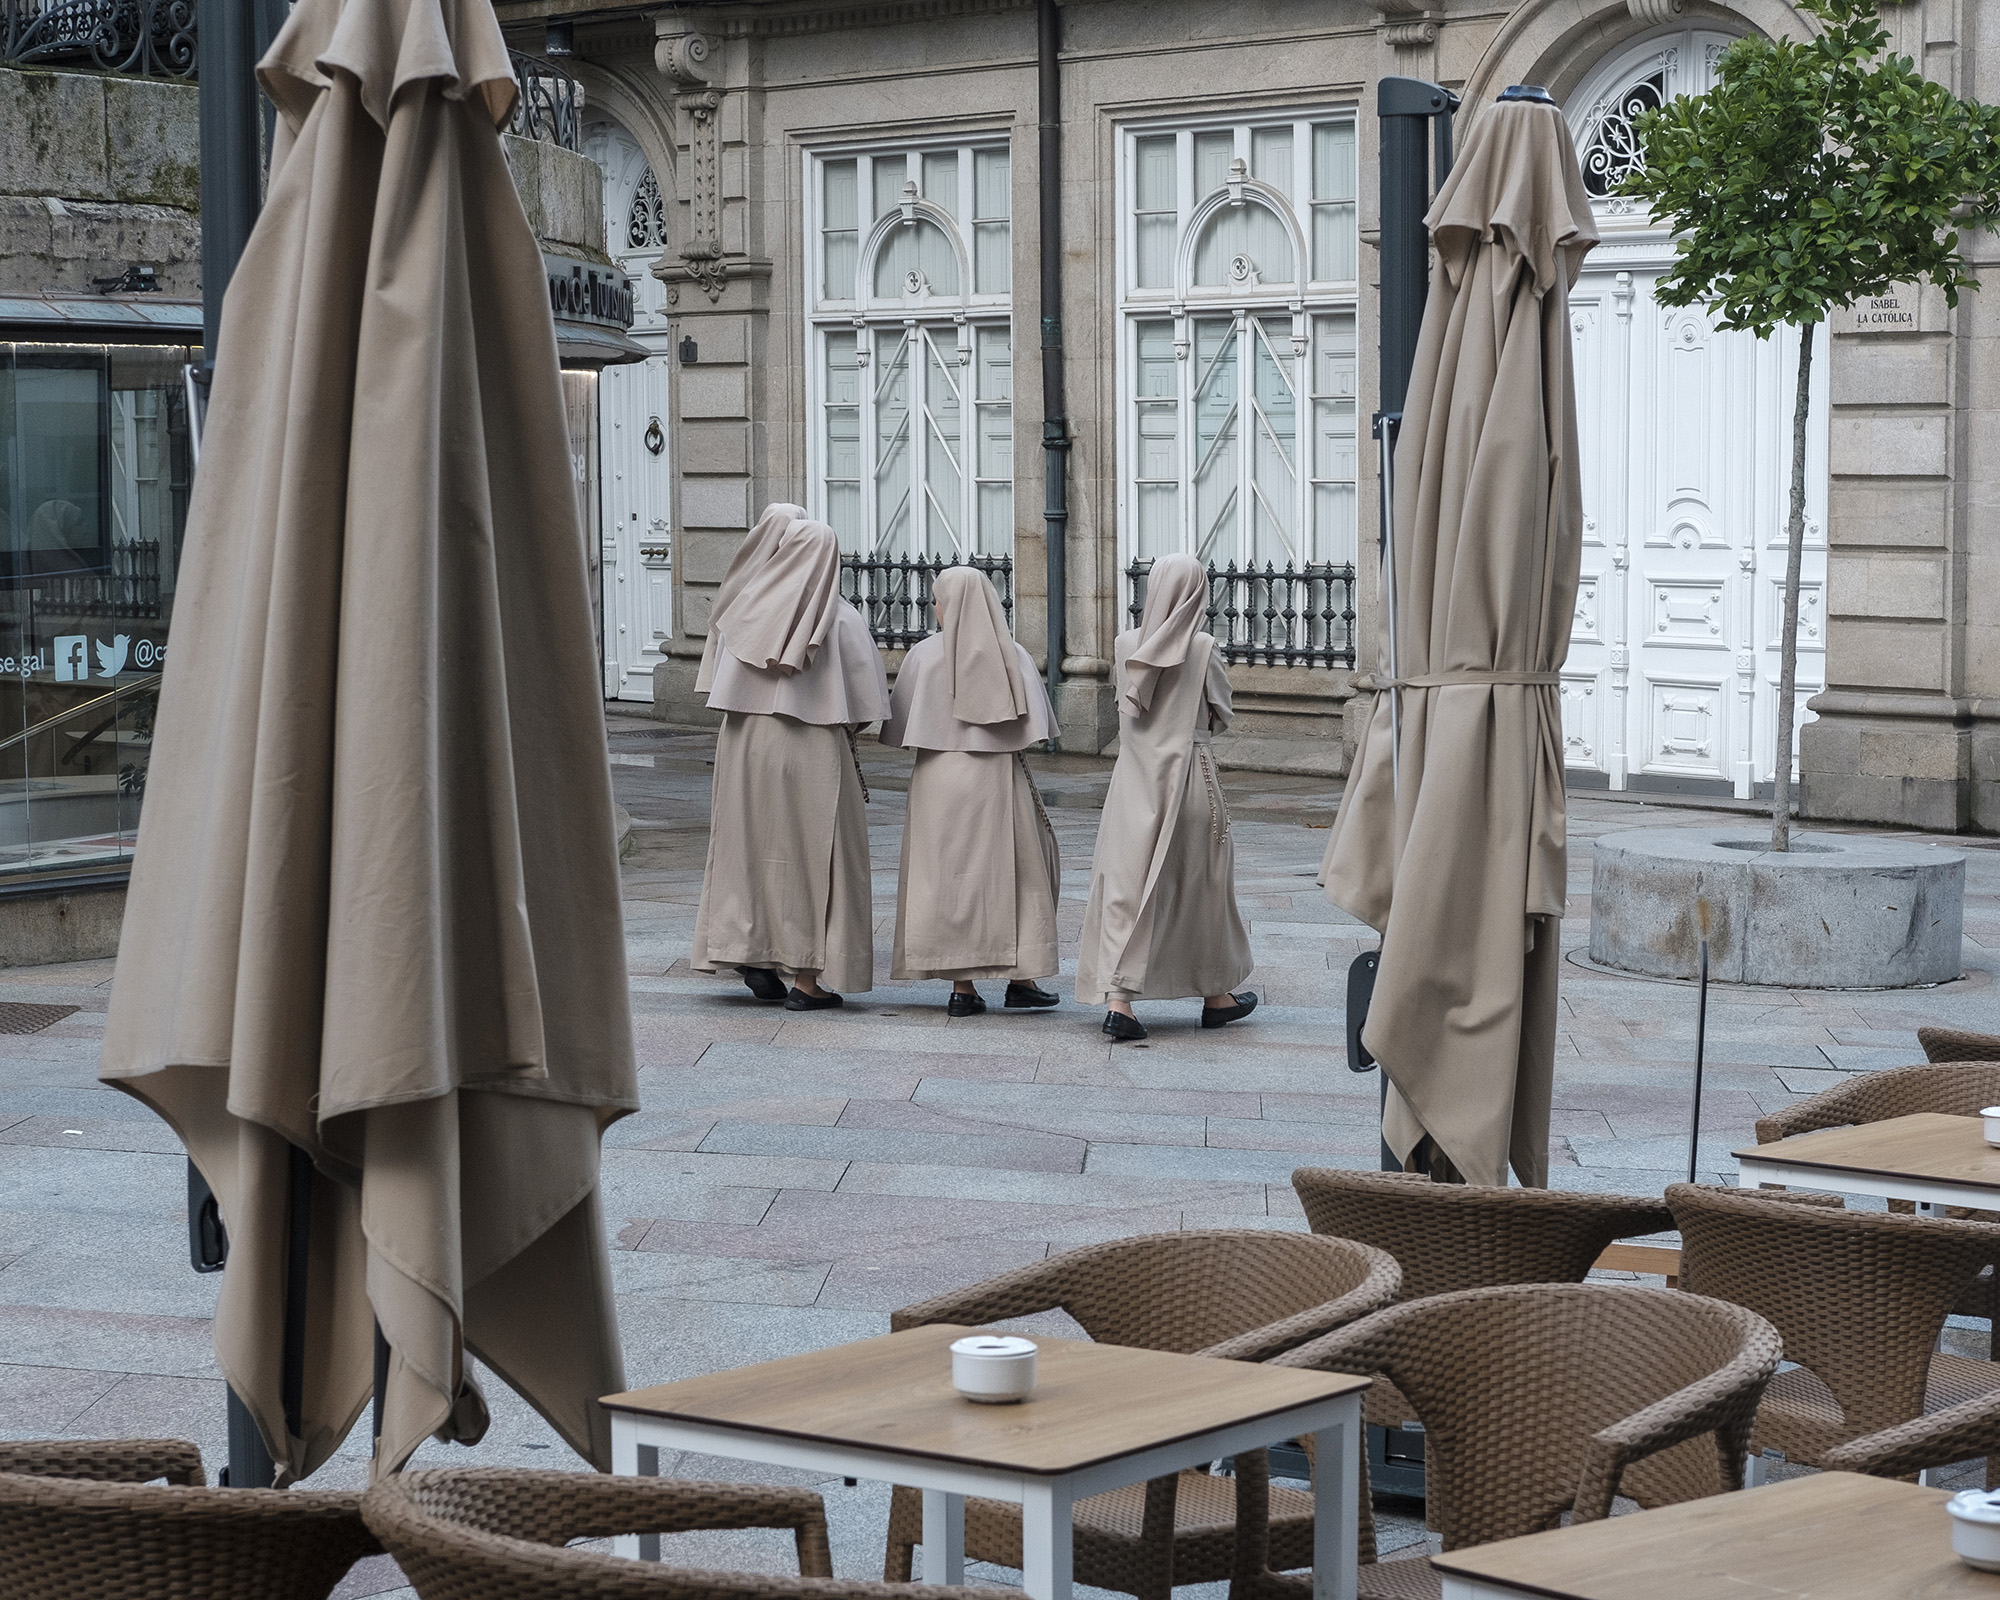 Nuns walk down the street matching the colour and texture of the canopies in the adjacent cafe